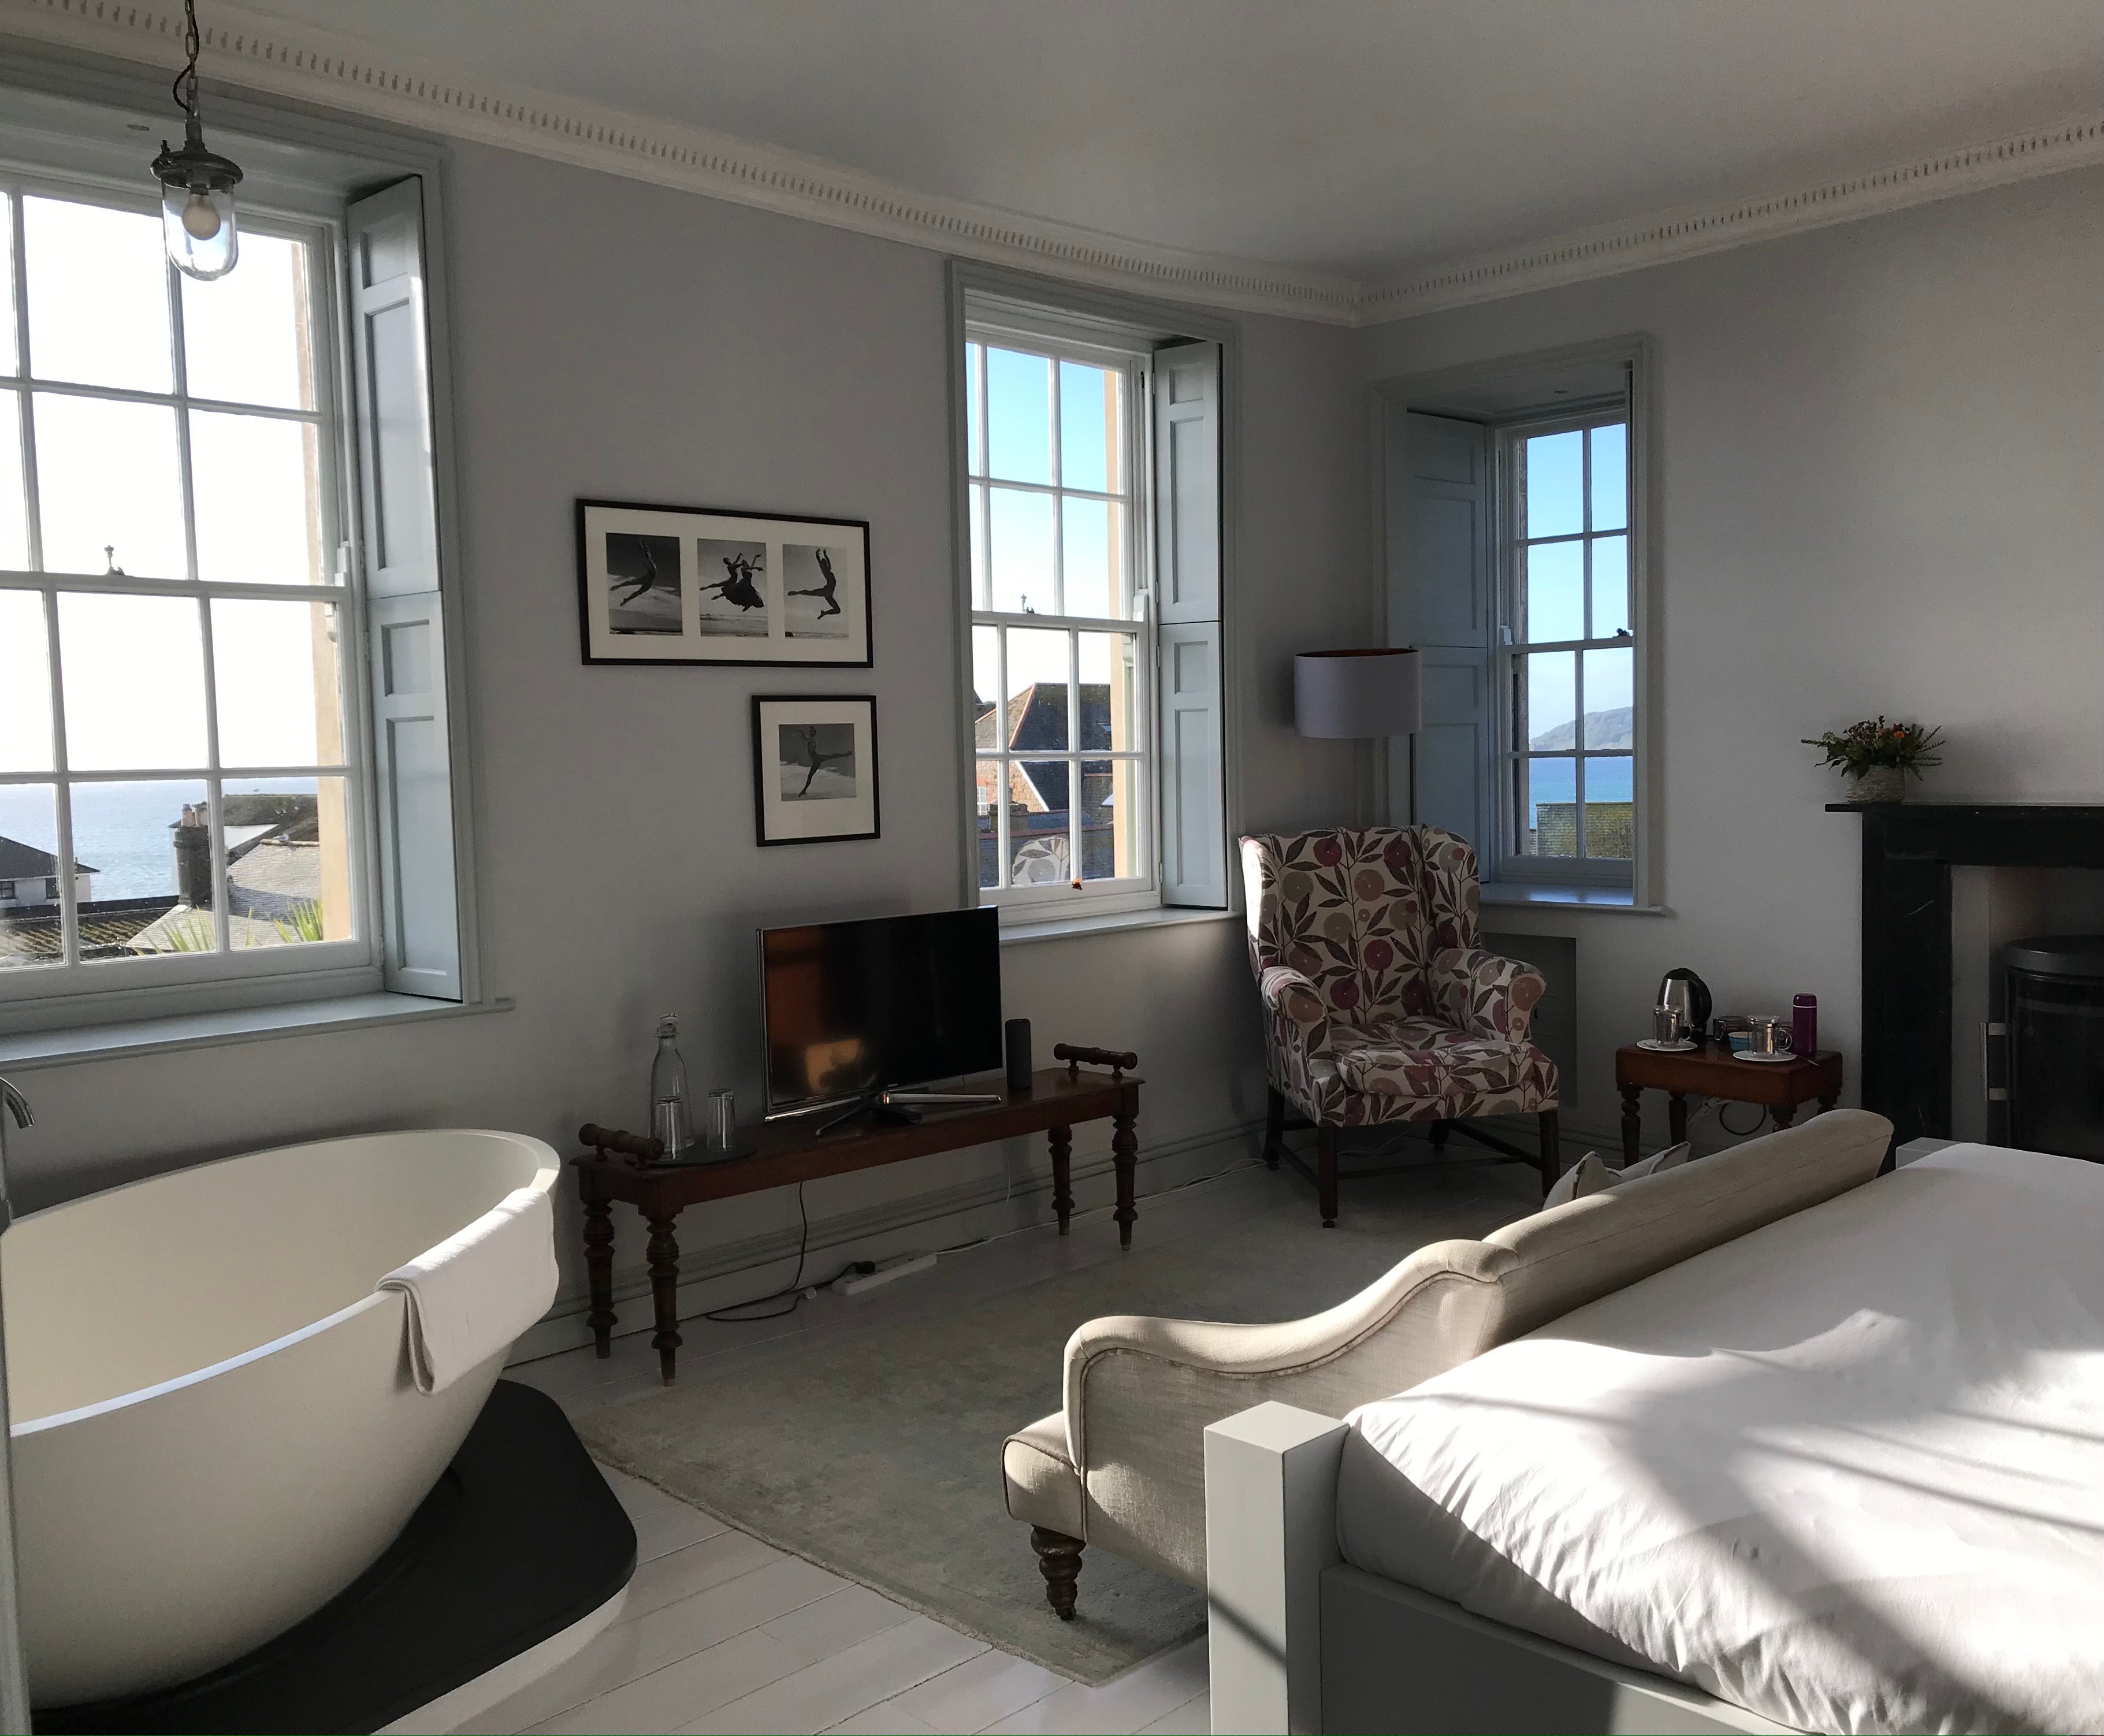 Indulge in a stay at Chapel House boutique hotel